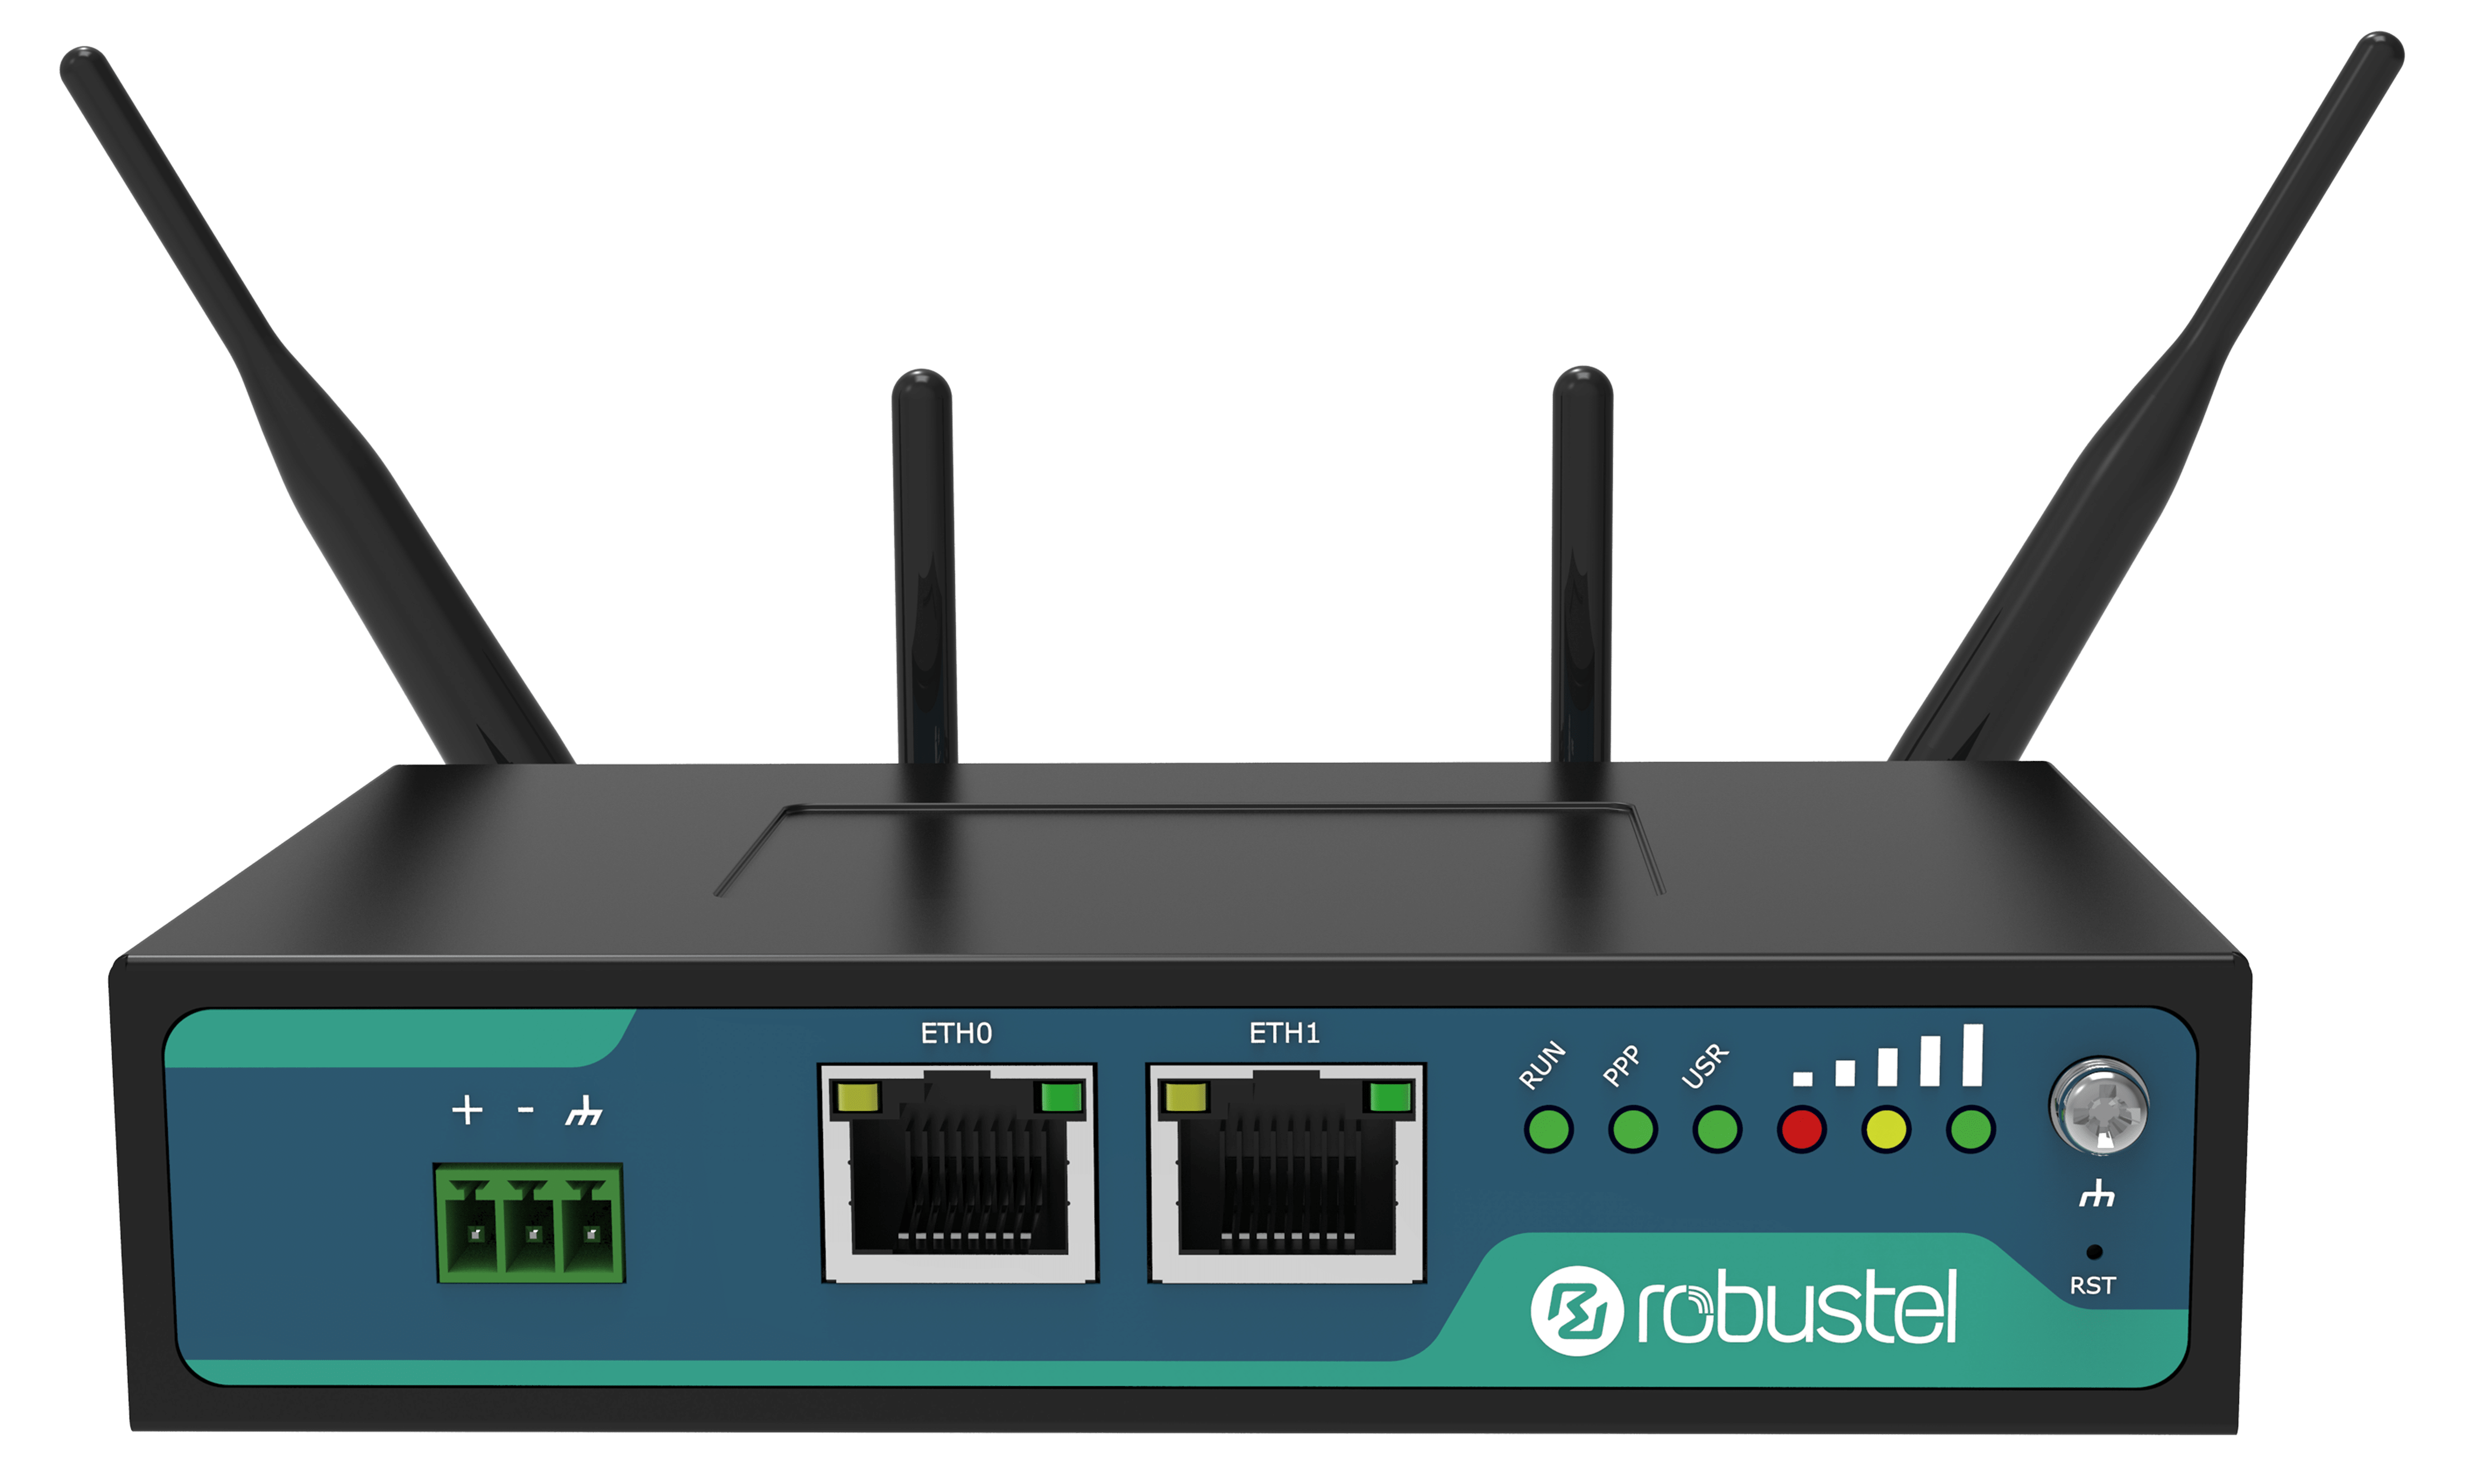 Robustel R2000 industrial-grade 3G/4G router for IoT applications